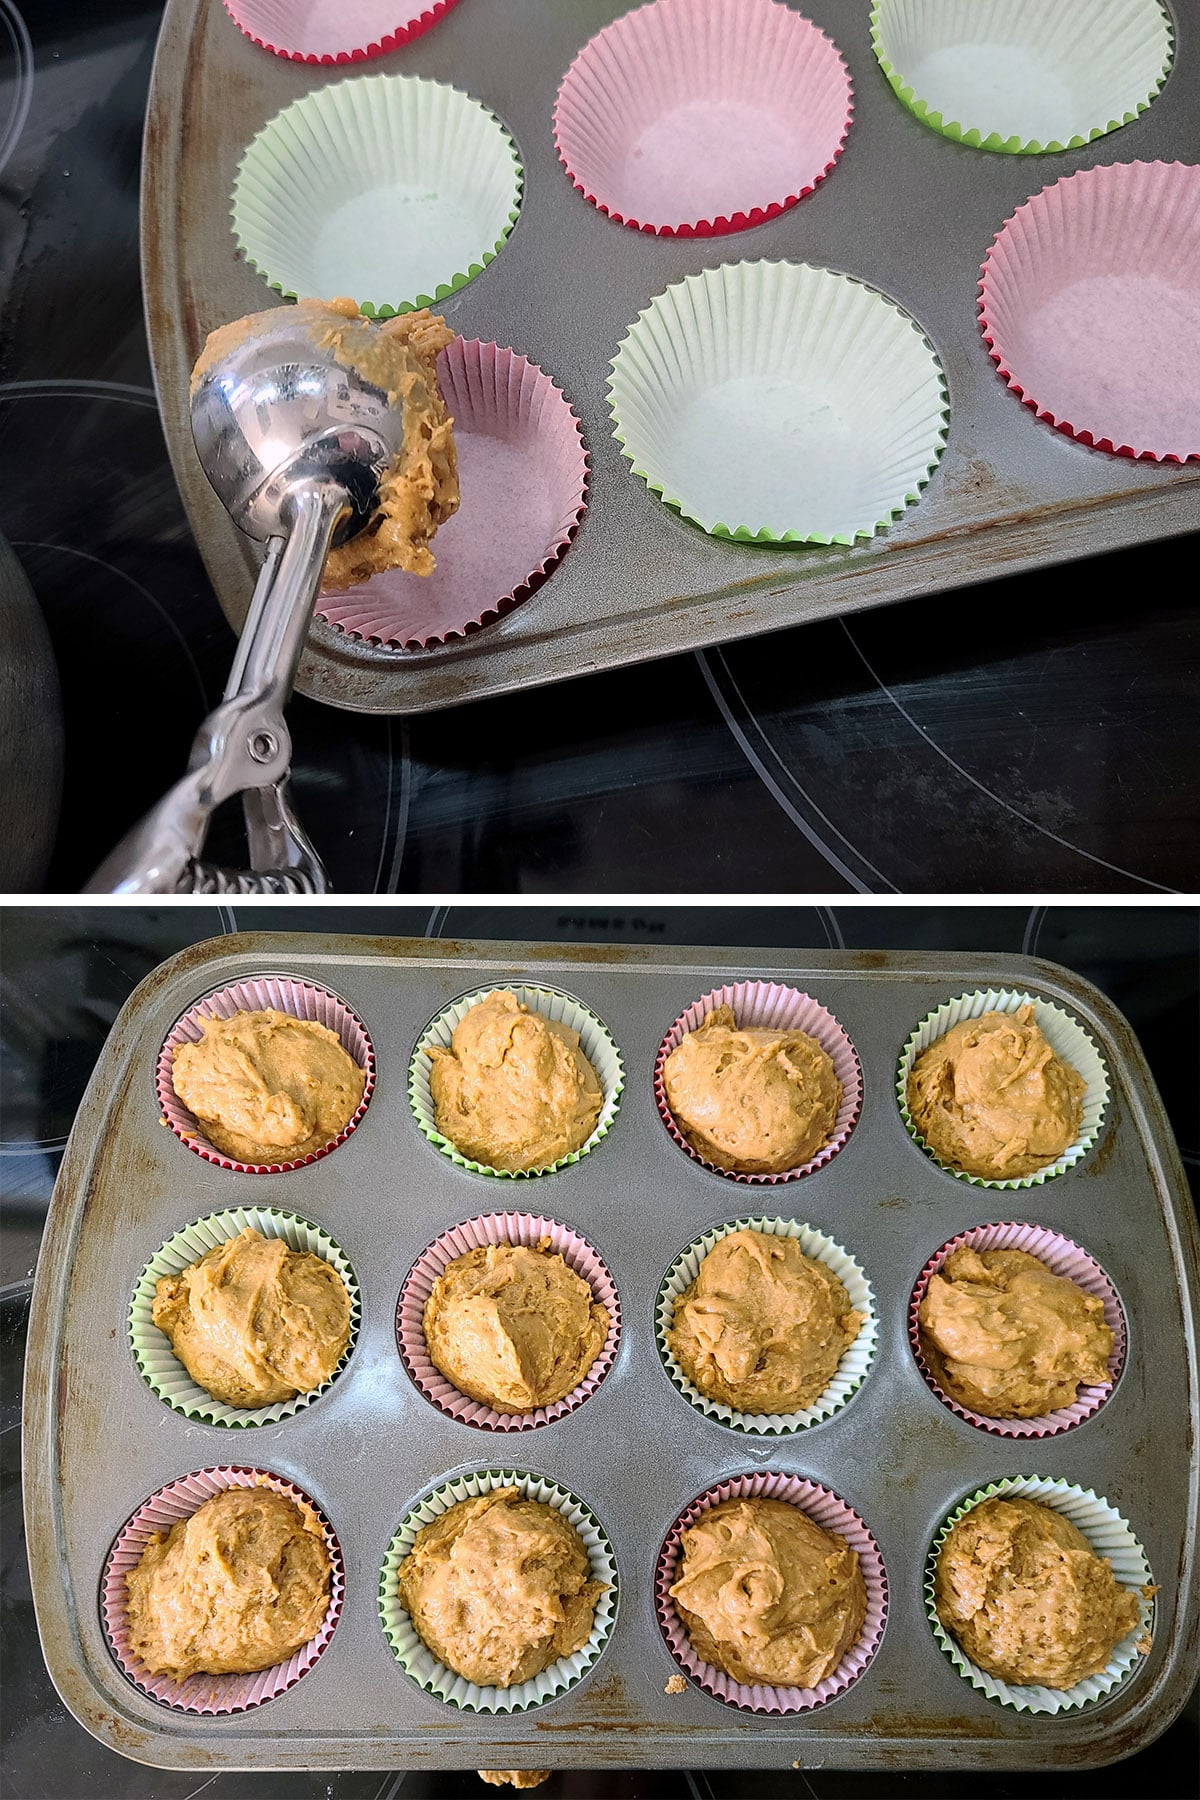 A 2 part image showing an ice cream scoop being used to fill the lined muffin tin.